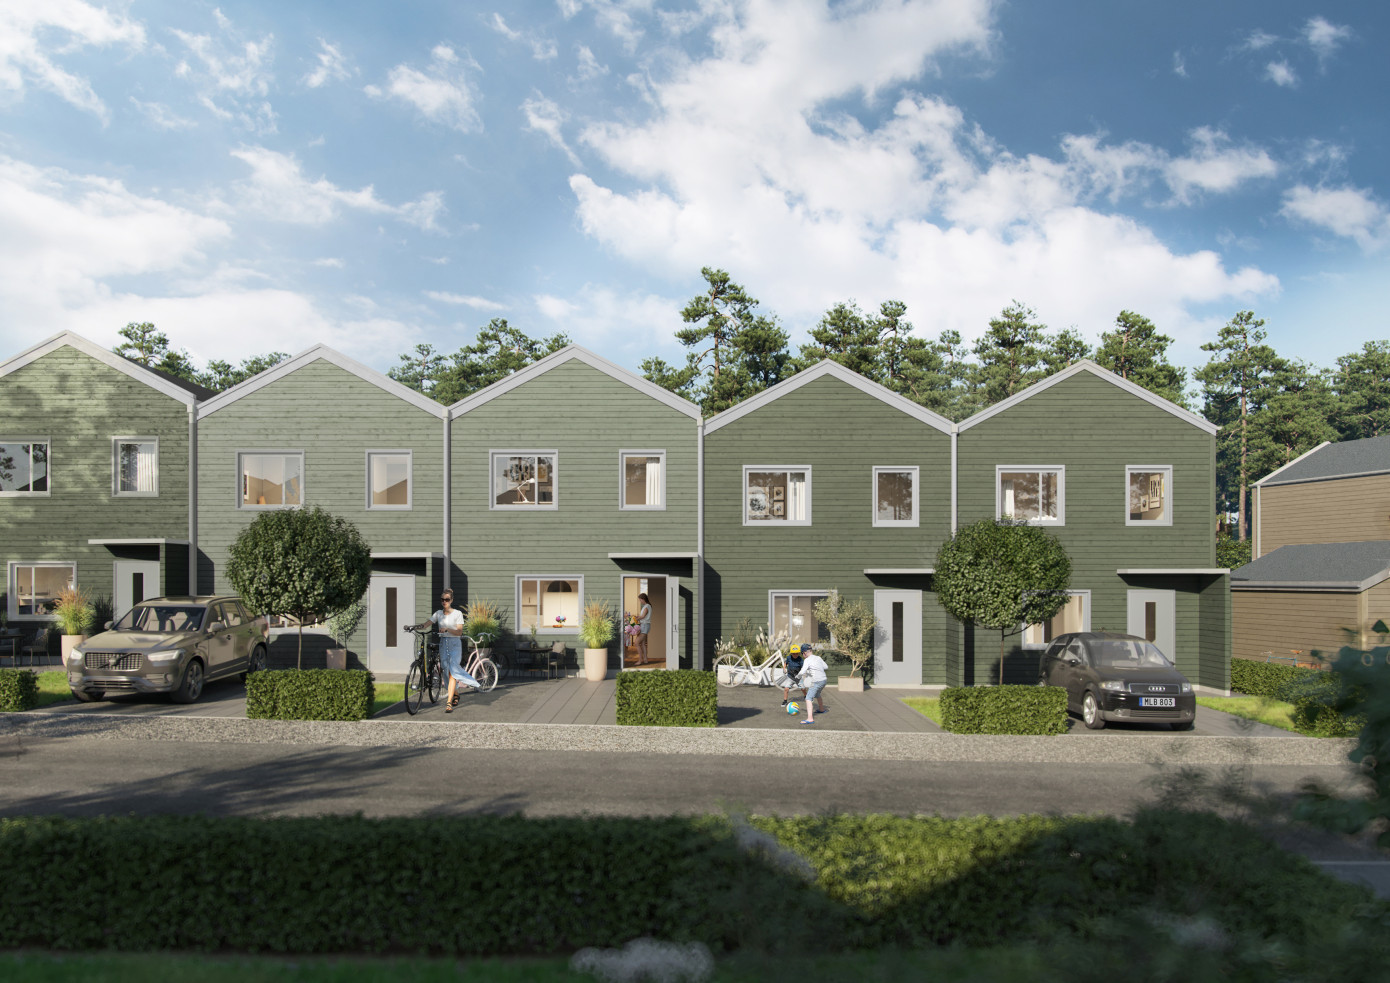 Götenehus Group announces layoffs due to low demand for new homes in Sweden